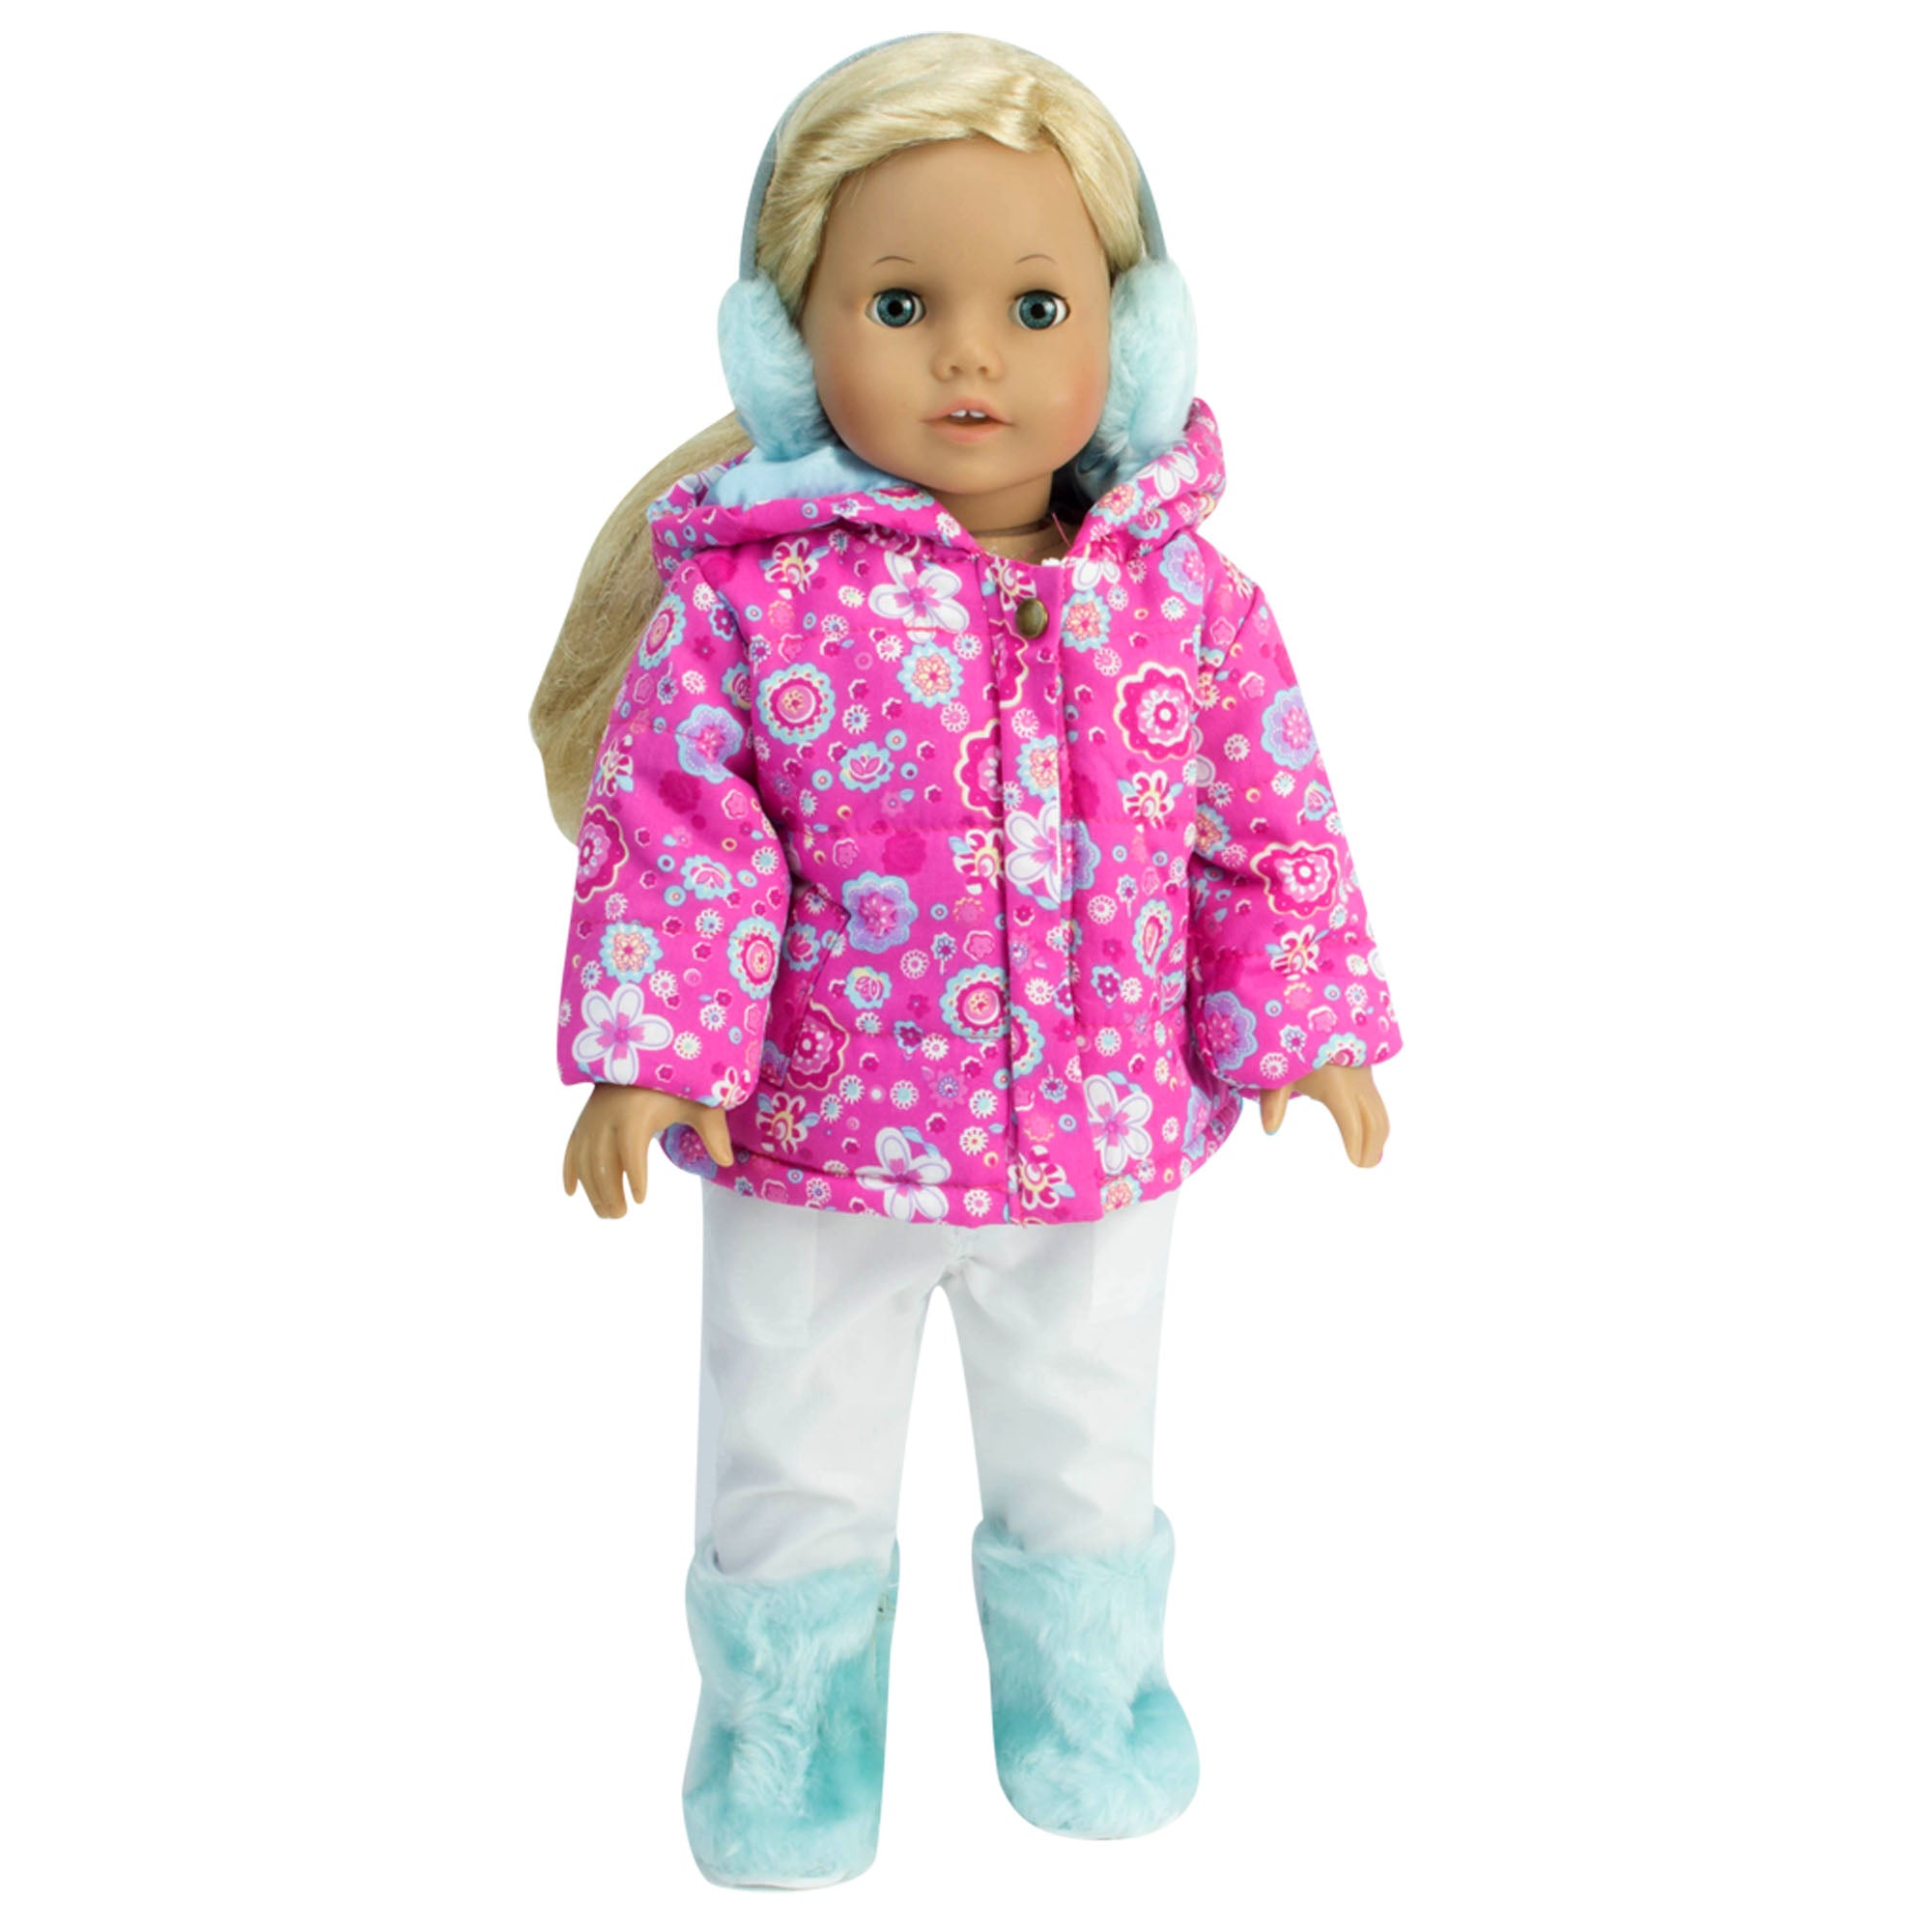 Sophia’s Two-Piece Bright & Colorful Flower Print Winter Parka & White Snowboard Pants Complete Clothing Outfit Set for 18” Dolls, Hot Pink